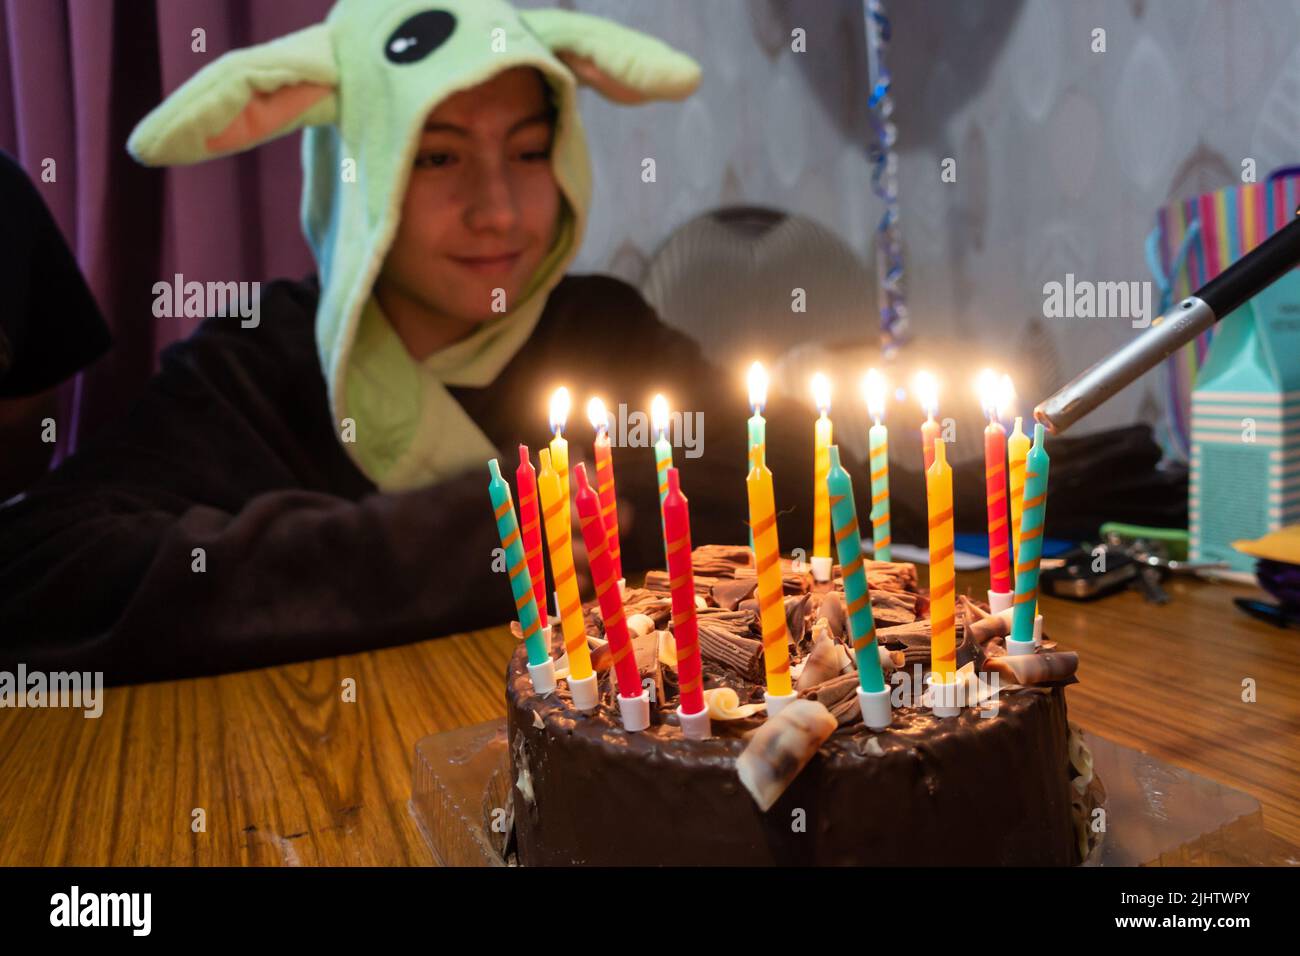 Candles on a chocolate birthday cake lit using a gas lighter as the birthday boy watches on. Stock Photo